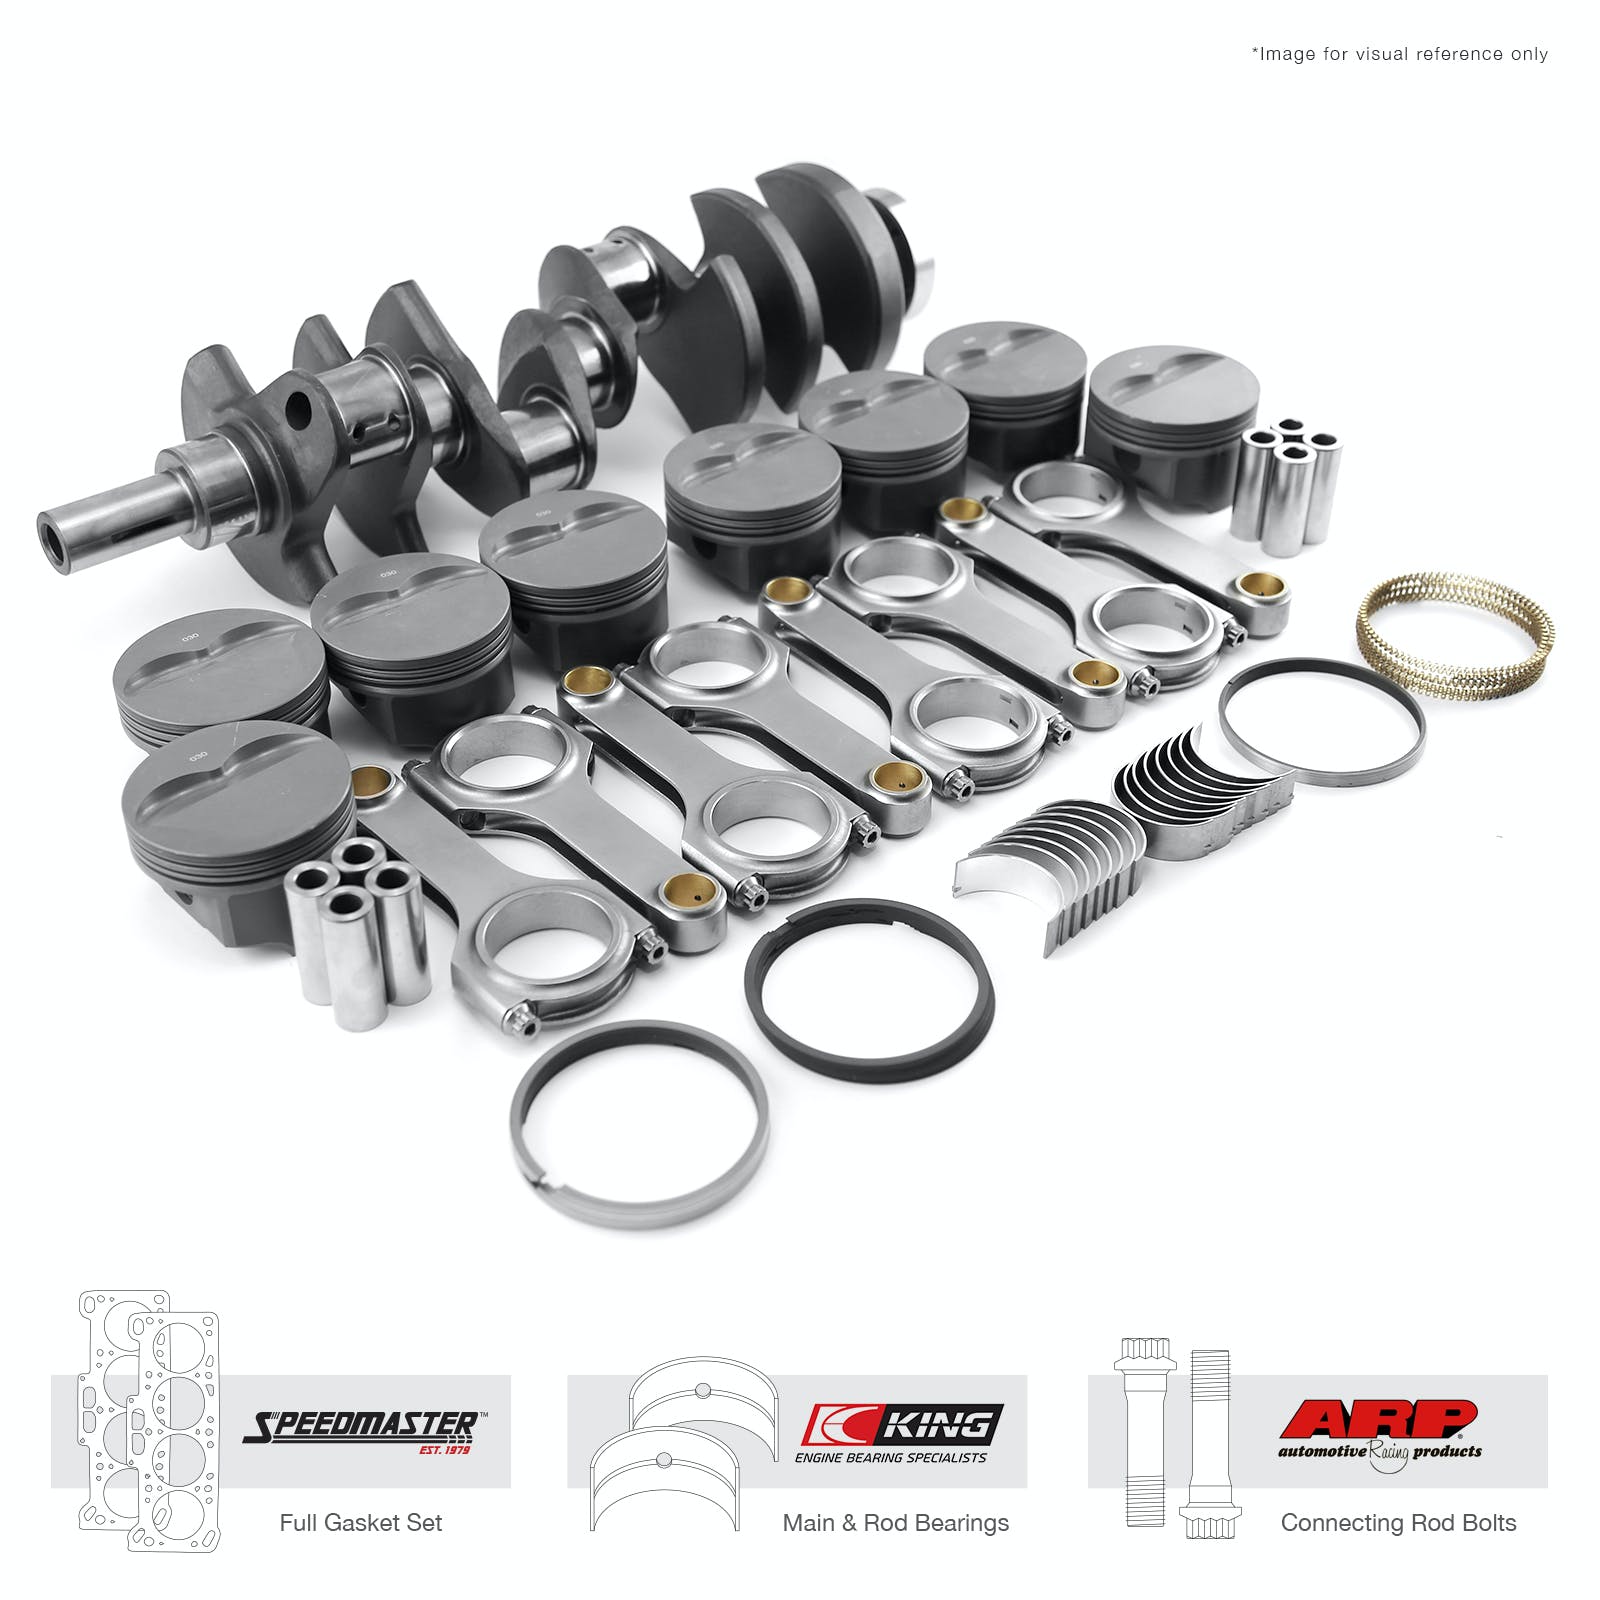 Speedmaster 1-290-016 3.750 383 ci 1Pc-Seal Rotating Assembly Kit - Outlaw Series